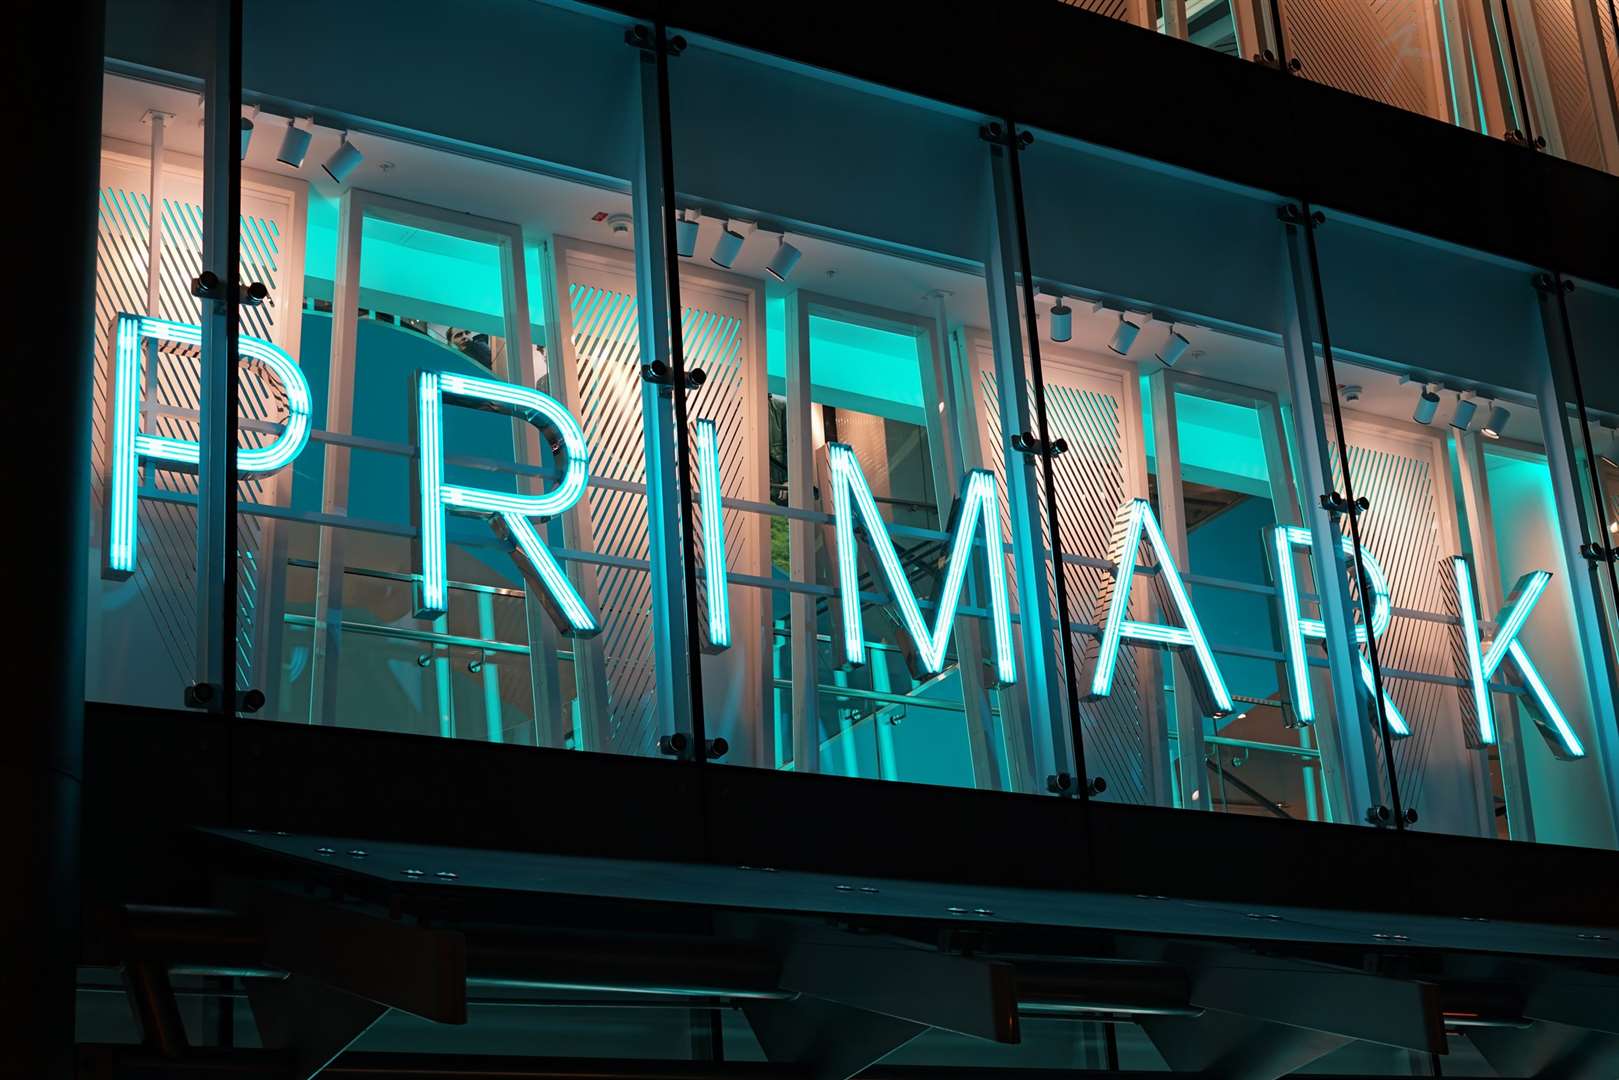 Primark will open a store in Bluewater